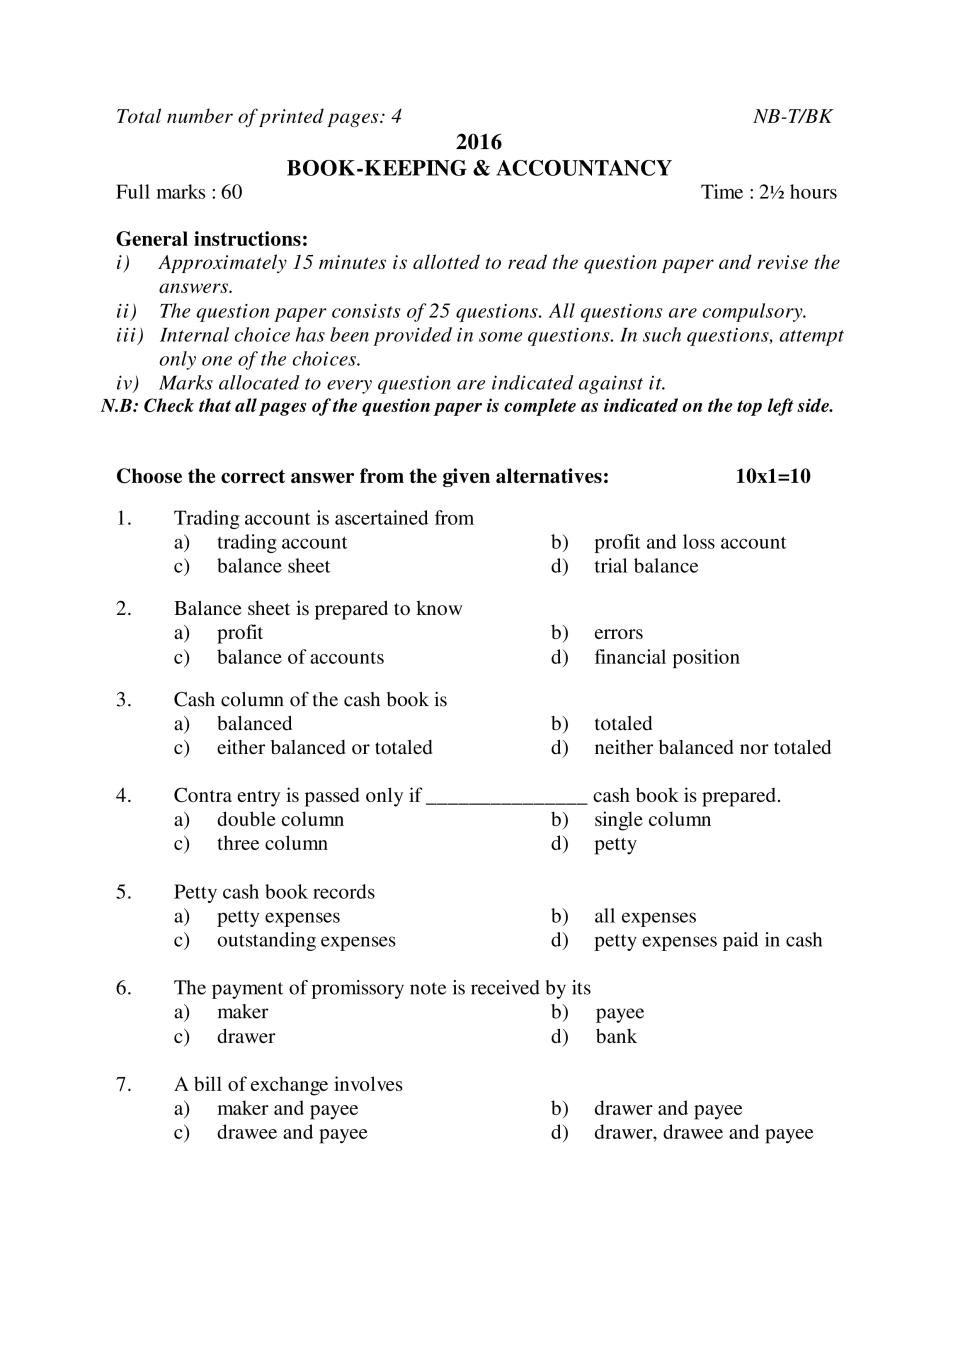 NBSE Class 10 Question Paper 2016 for Book Keeping Accountancy - Page 1